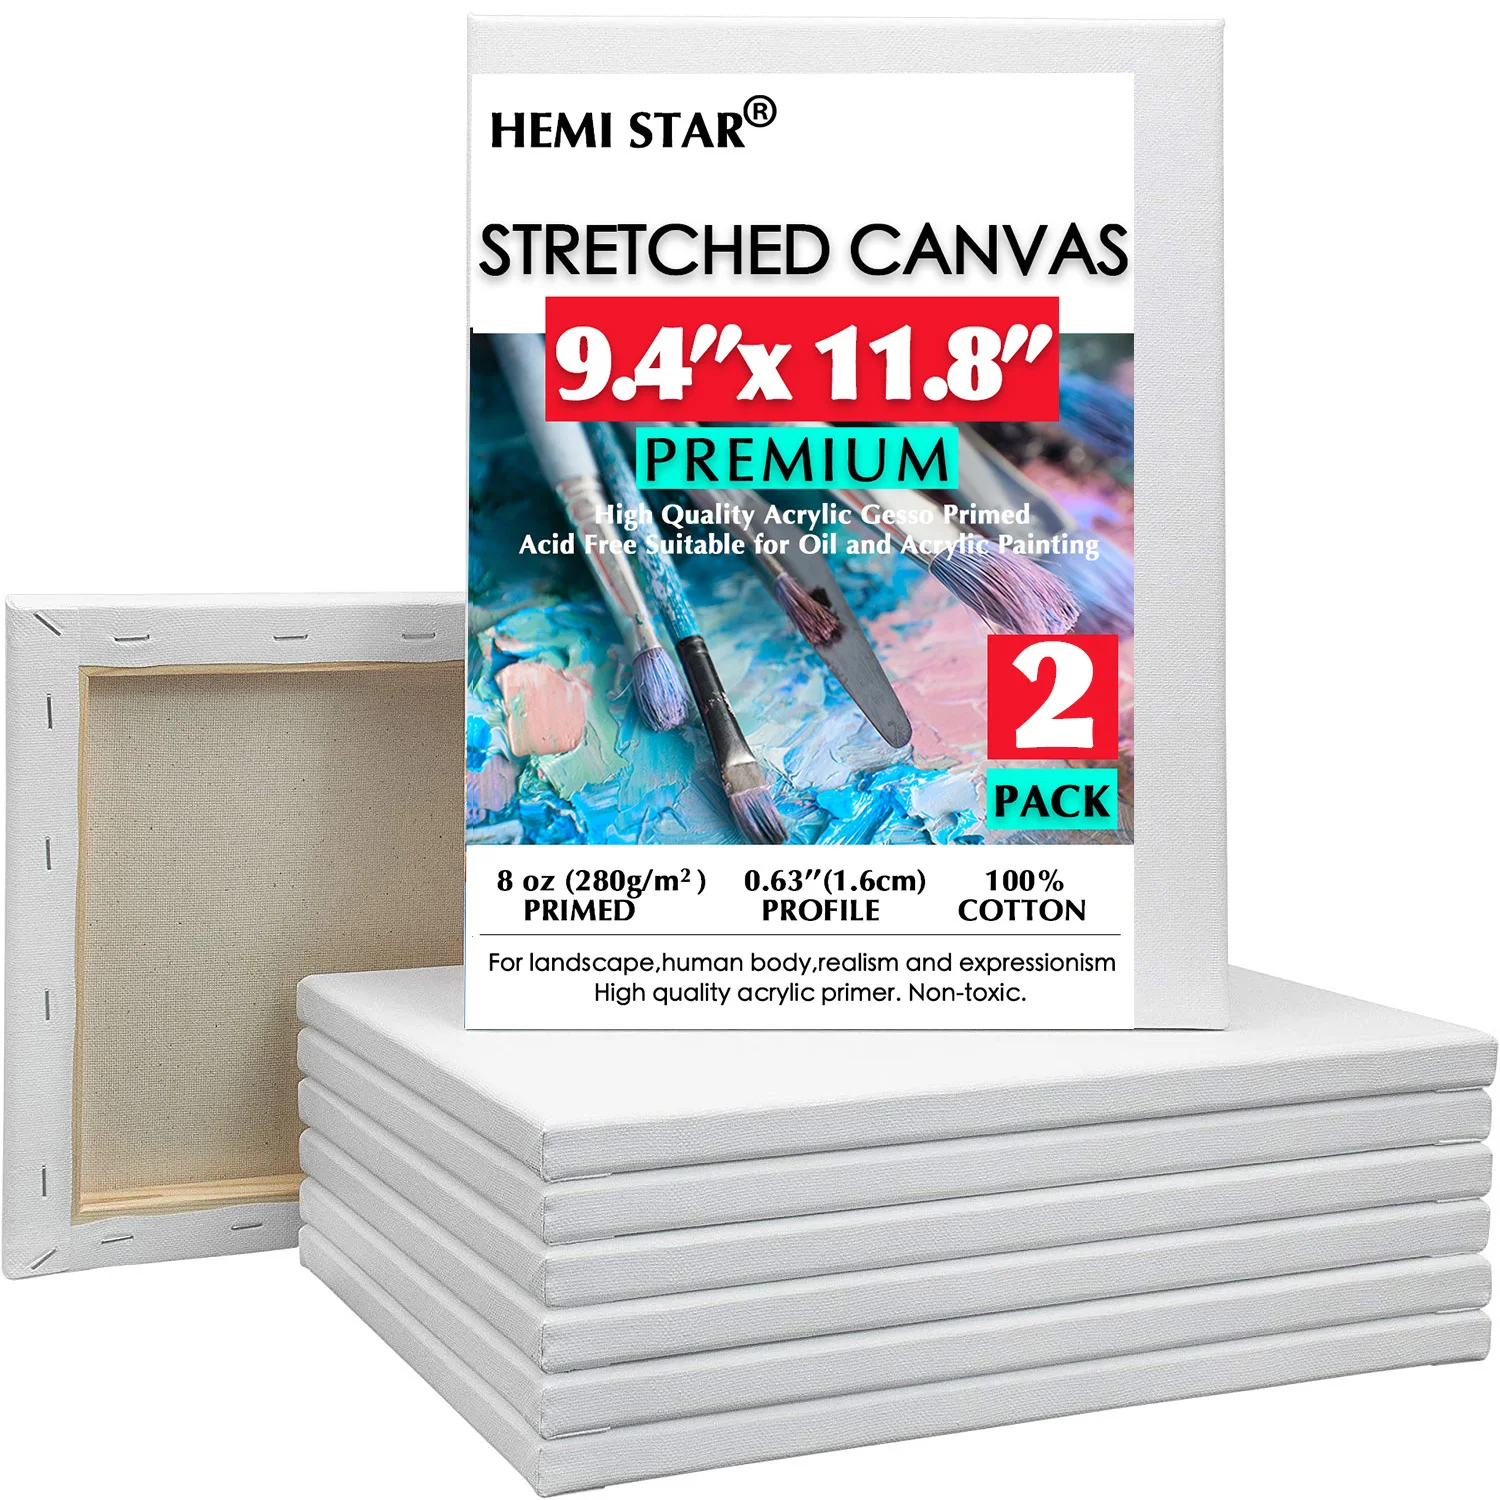 

2 Pack Stretched Canvas for Painting 9.4x11.8 inch,24x30cm Primed White 100% Cotton Artist Blank Canvas Board 8 oz Gesso-Primed